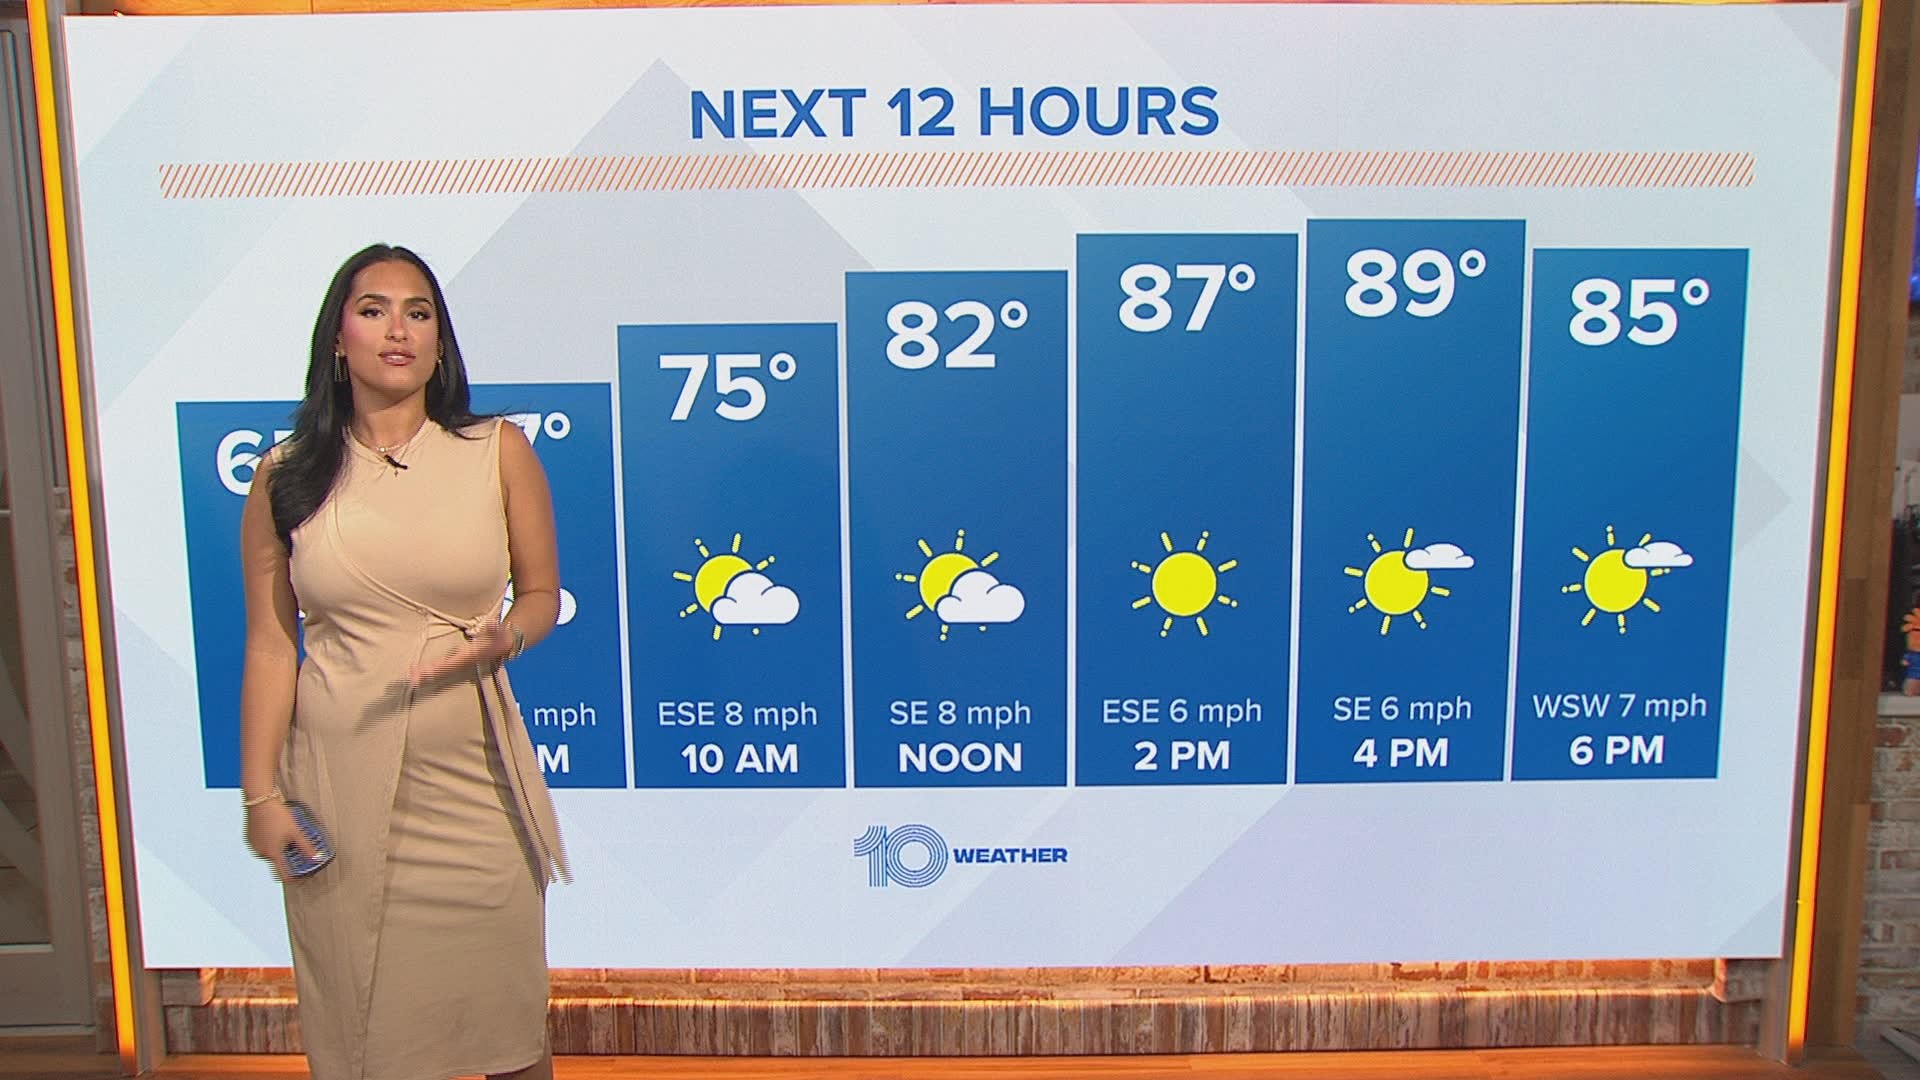 10 Tampa Bay meteorologist Amanda Pappas has your mid-week forecast as temperatures are heating up across the Tampa Bay-area.